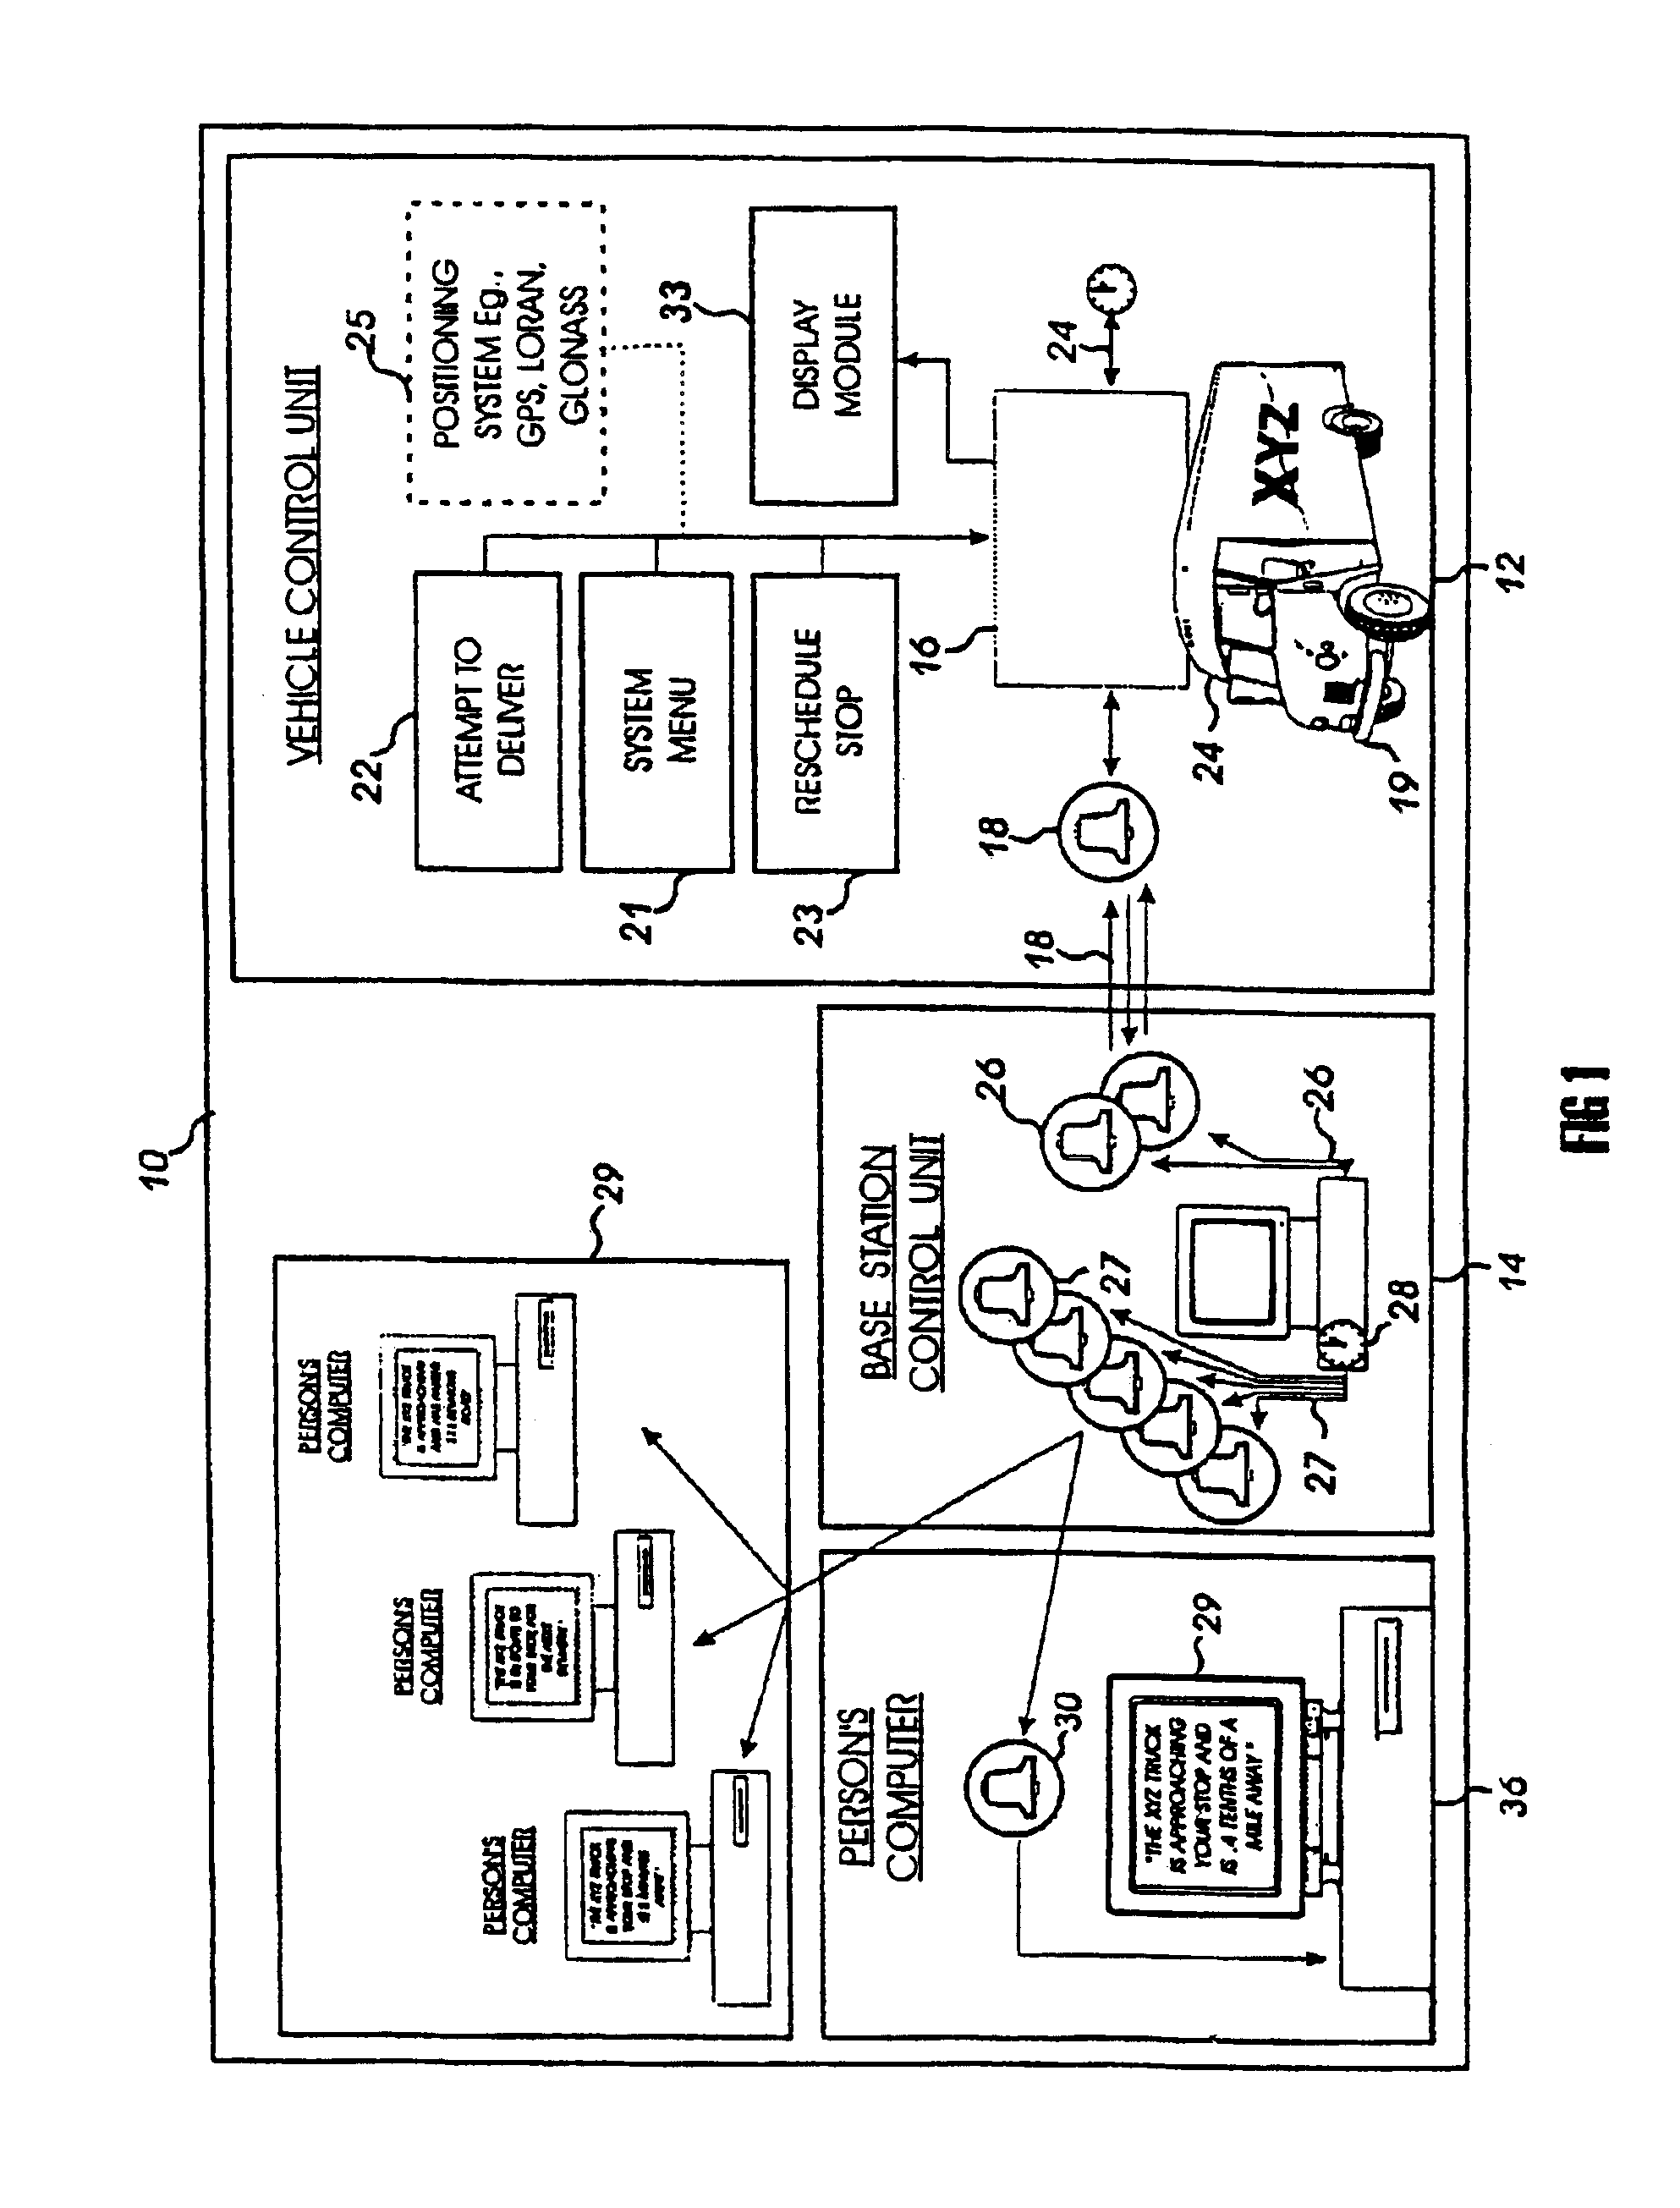 Notification systems and methods with user-definable notifications based upon occurance of events